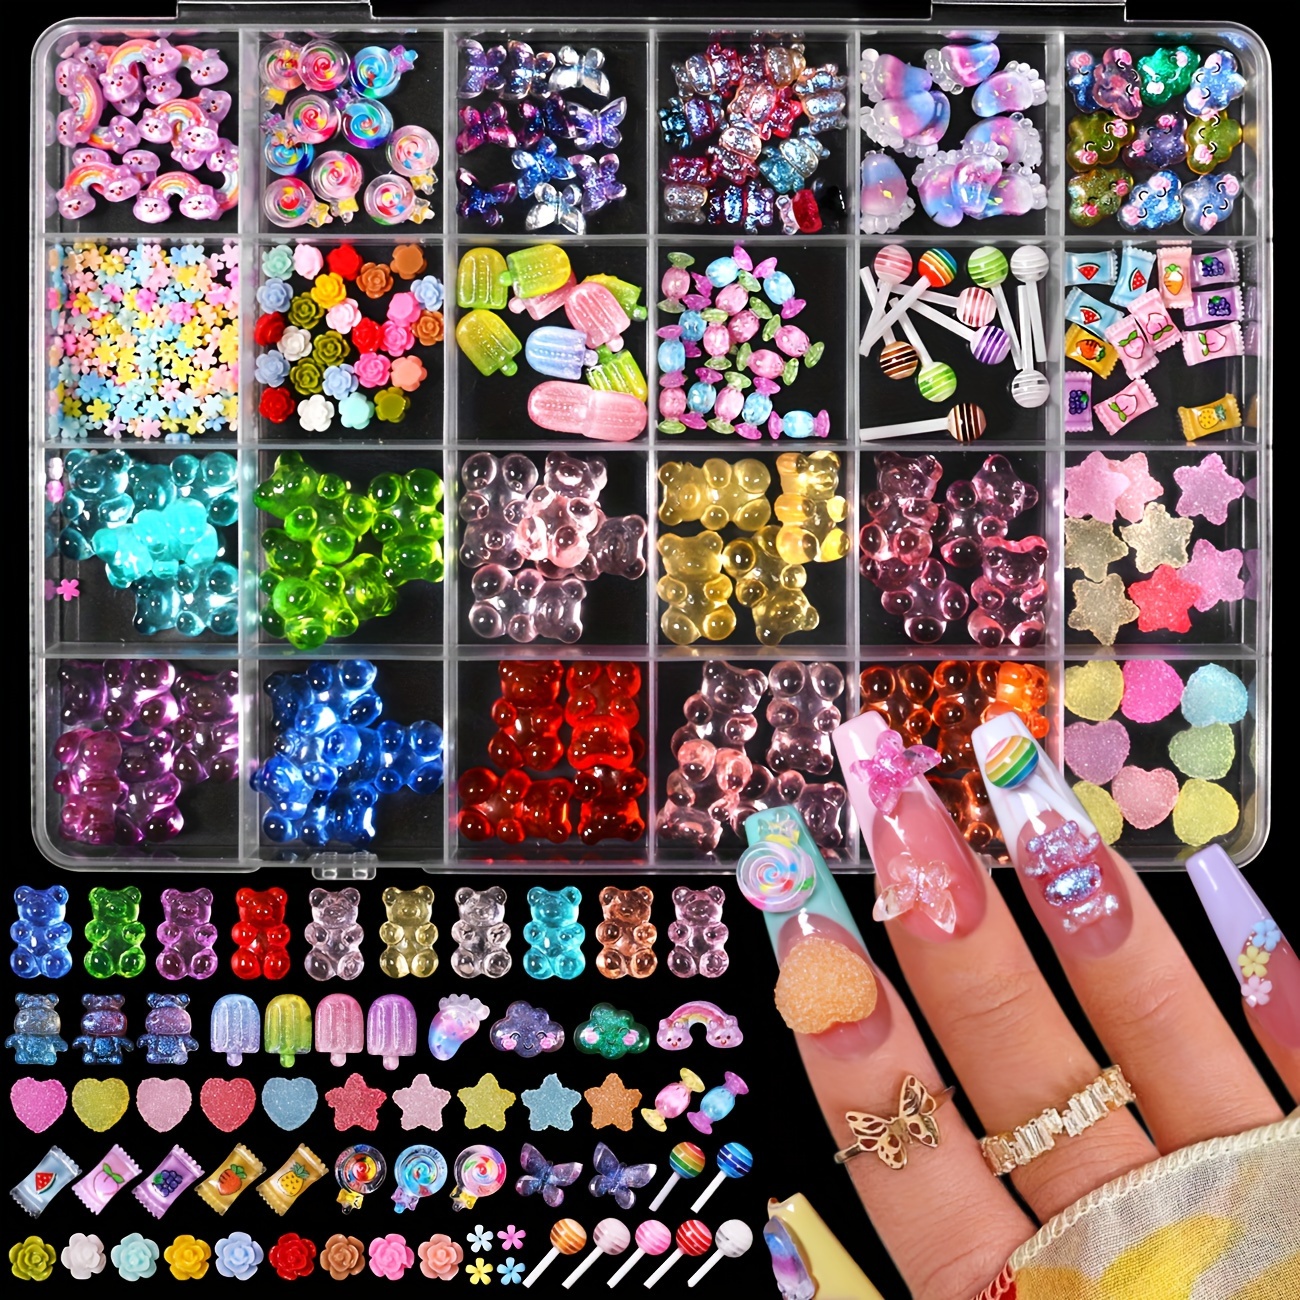 

Major Dijit 24-slot Nail Art Charms Set - Cute Cartoon Bear & Candy Designs, Alcohol-free Resin Decorations For Diy Manicures Nail Charms And Accessories Nail Art Accessories